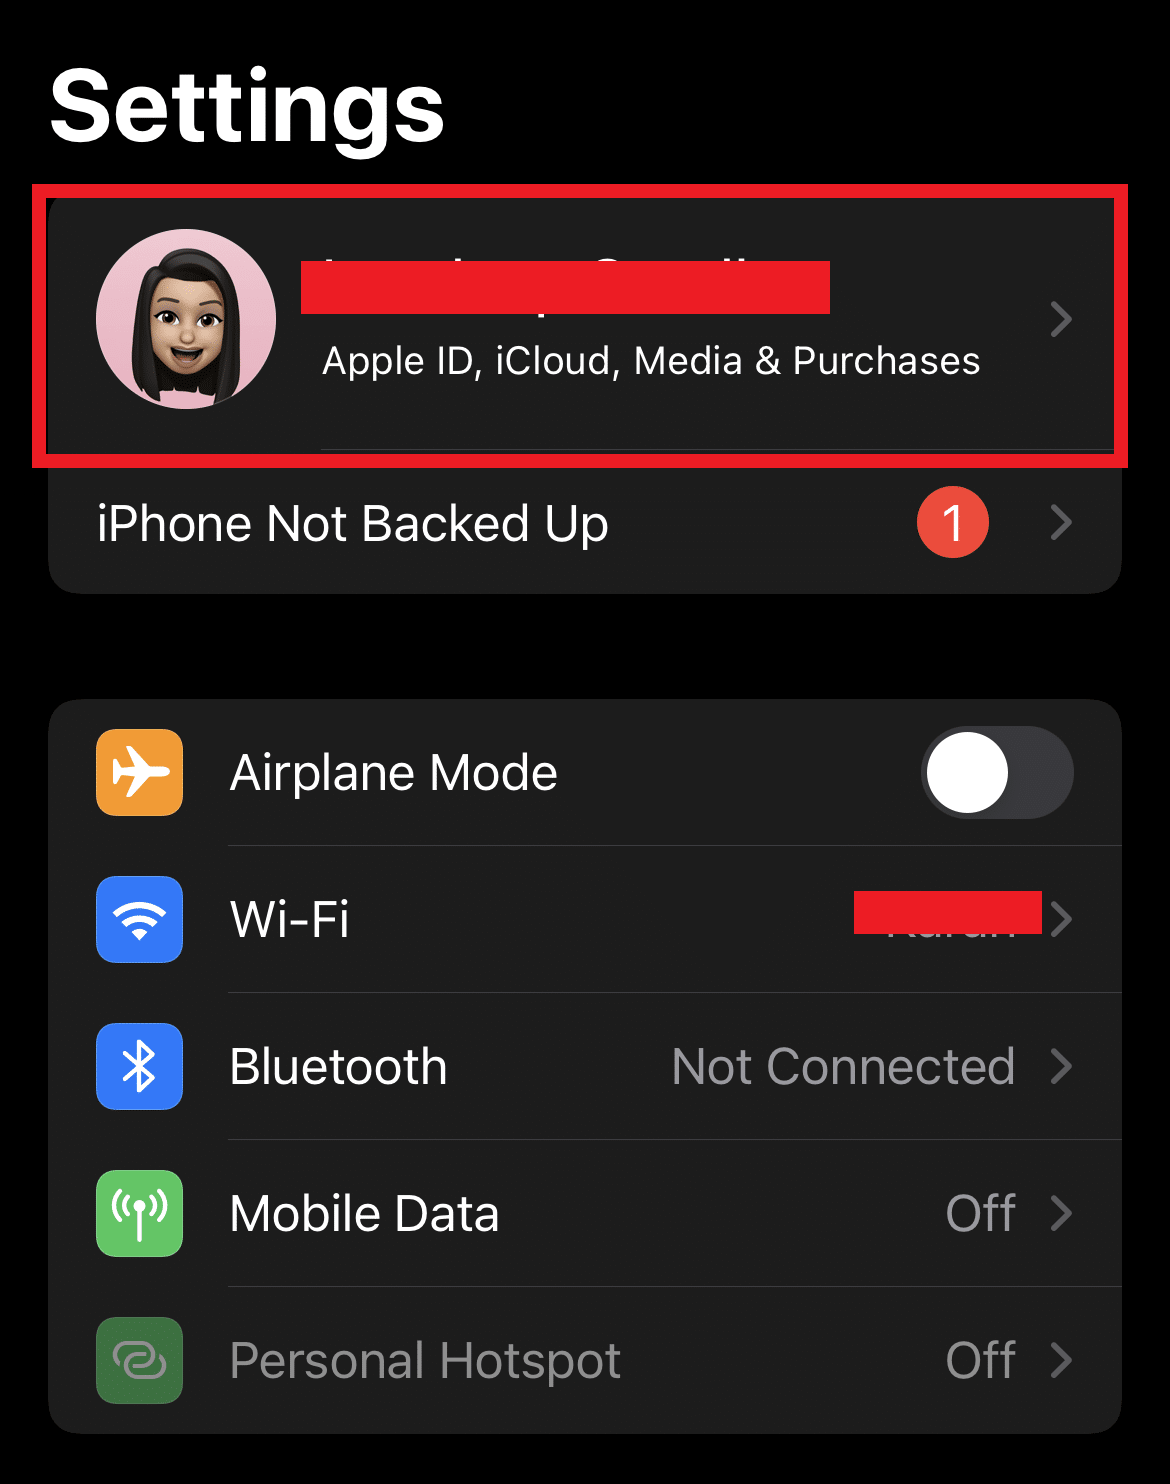 Tap on your Apple ID from the top of the Settings screen